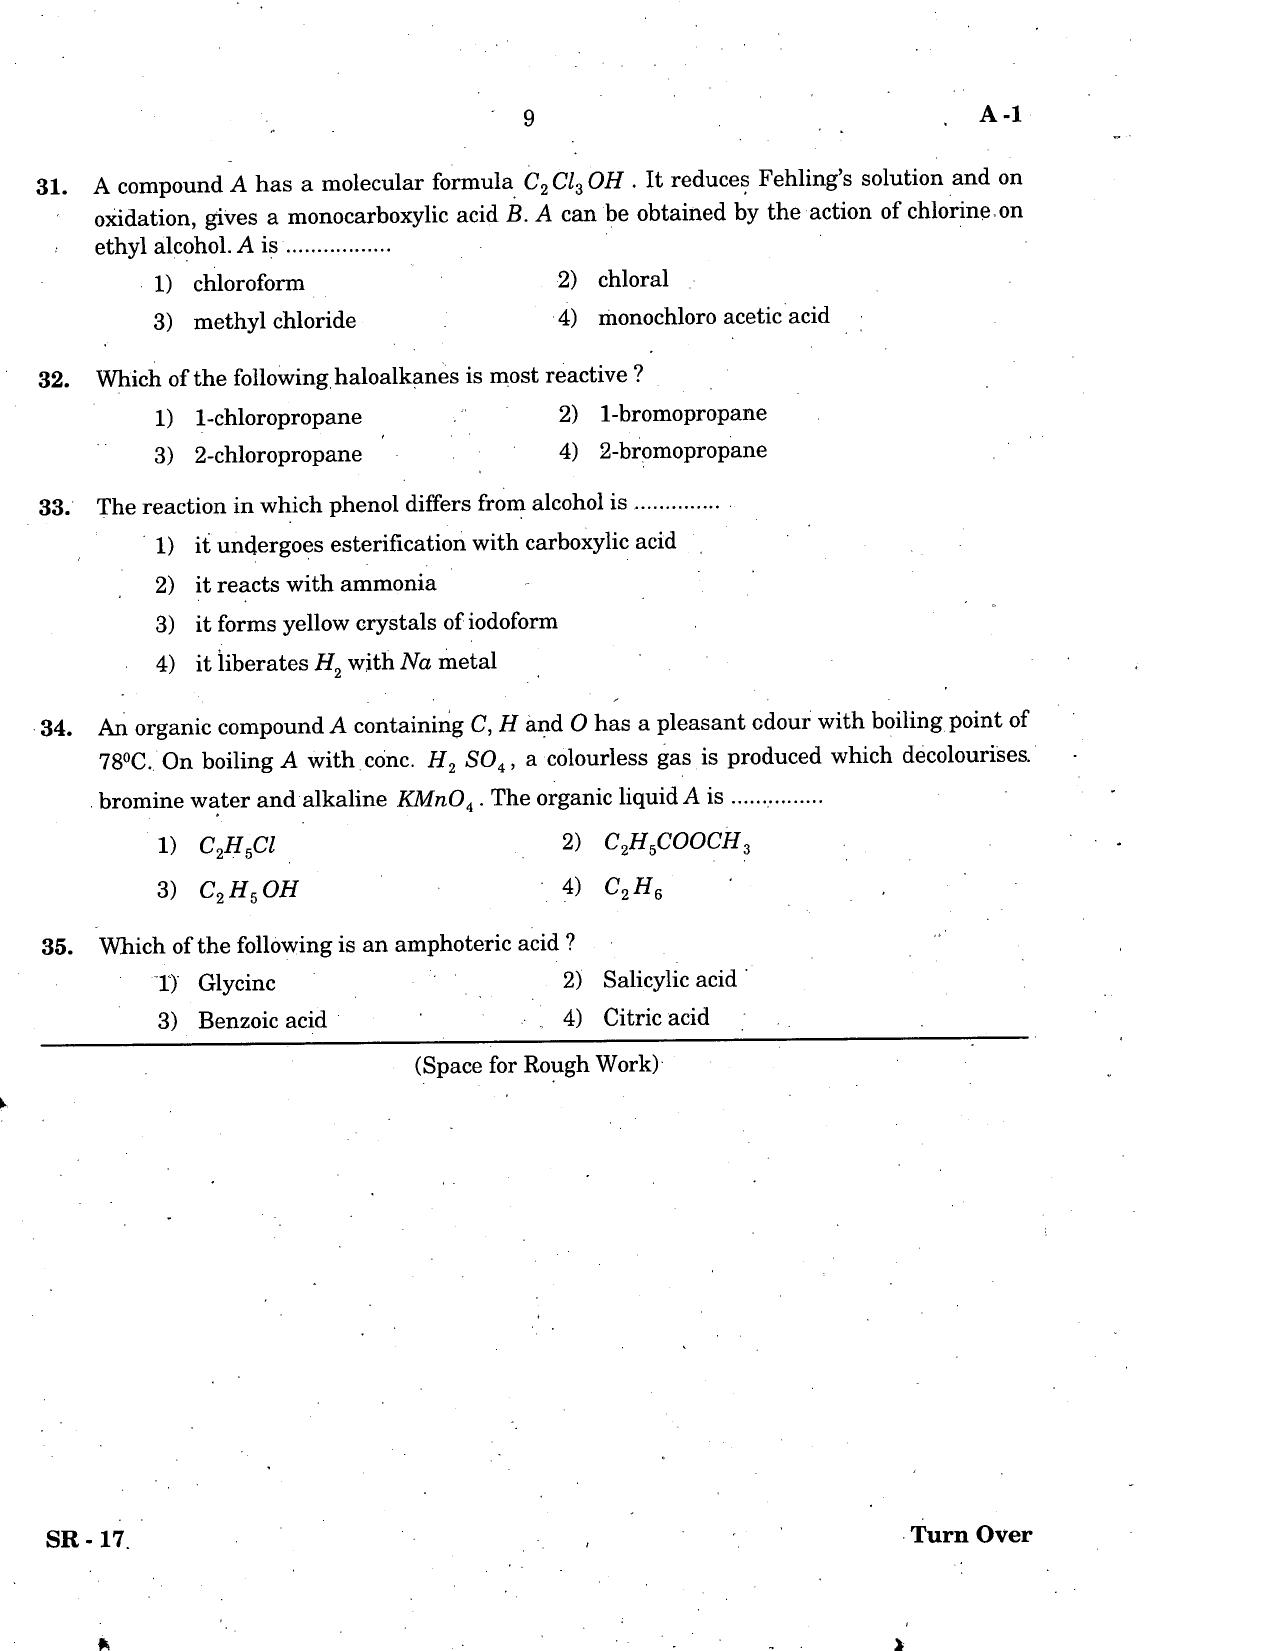 KCET Chemistry 2005 Question Papers - Page 9